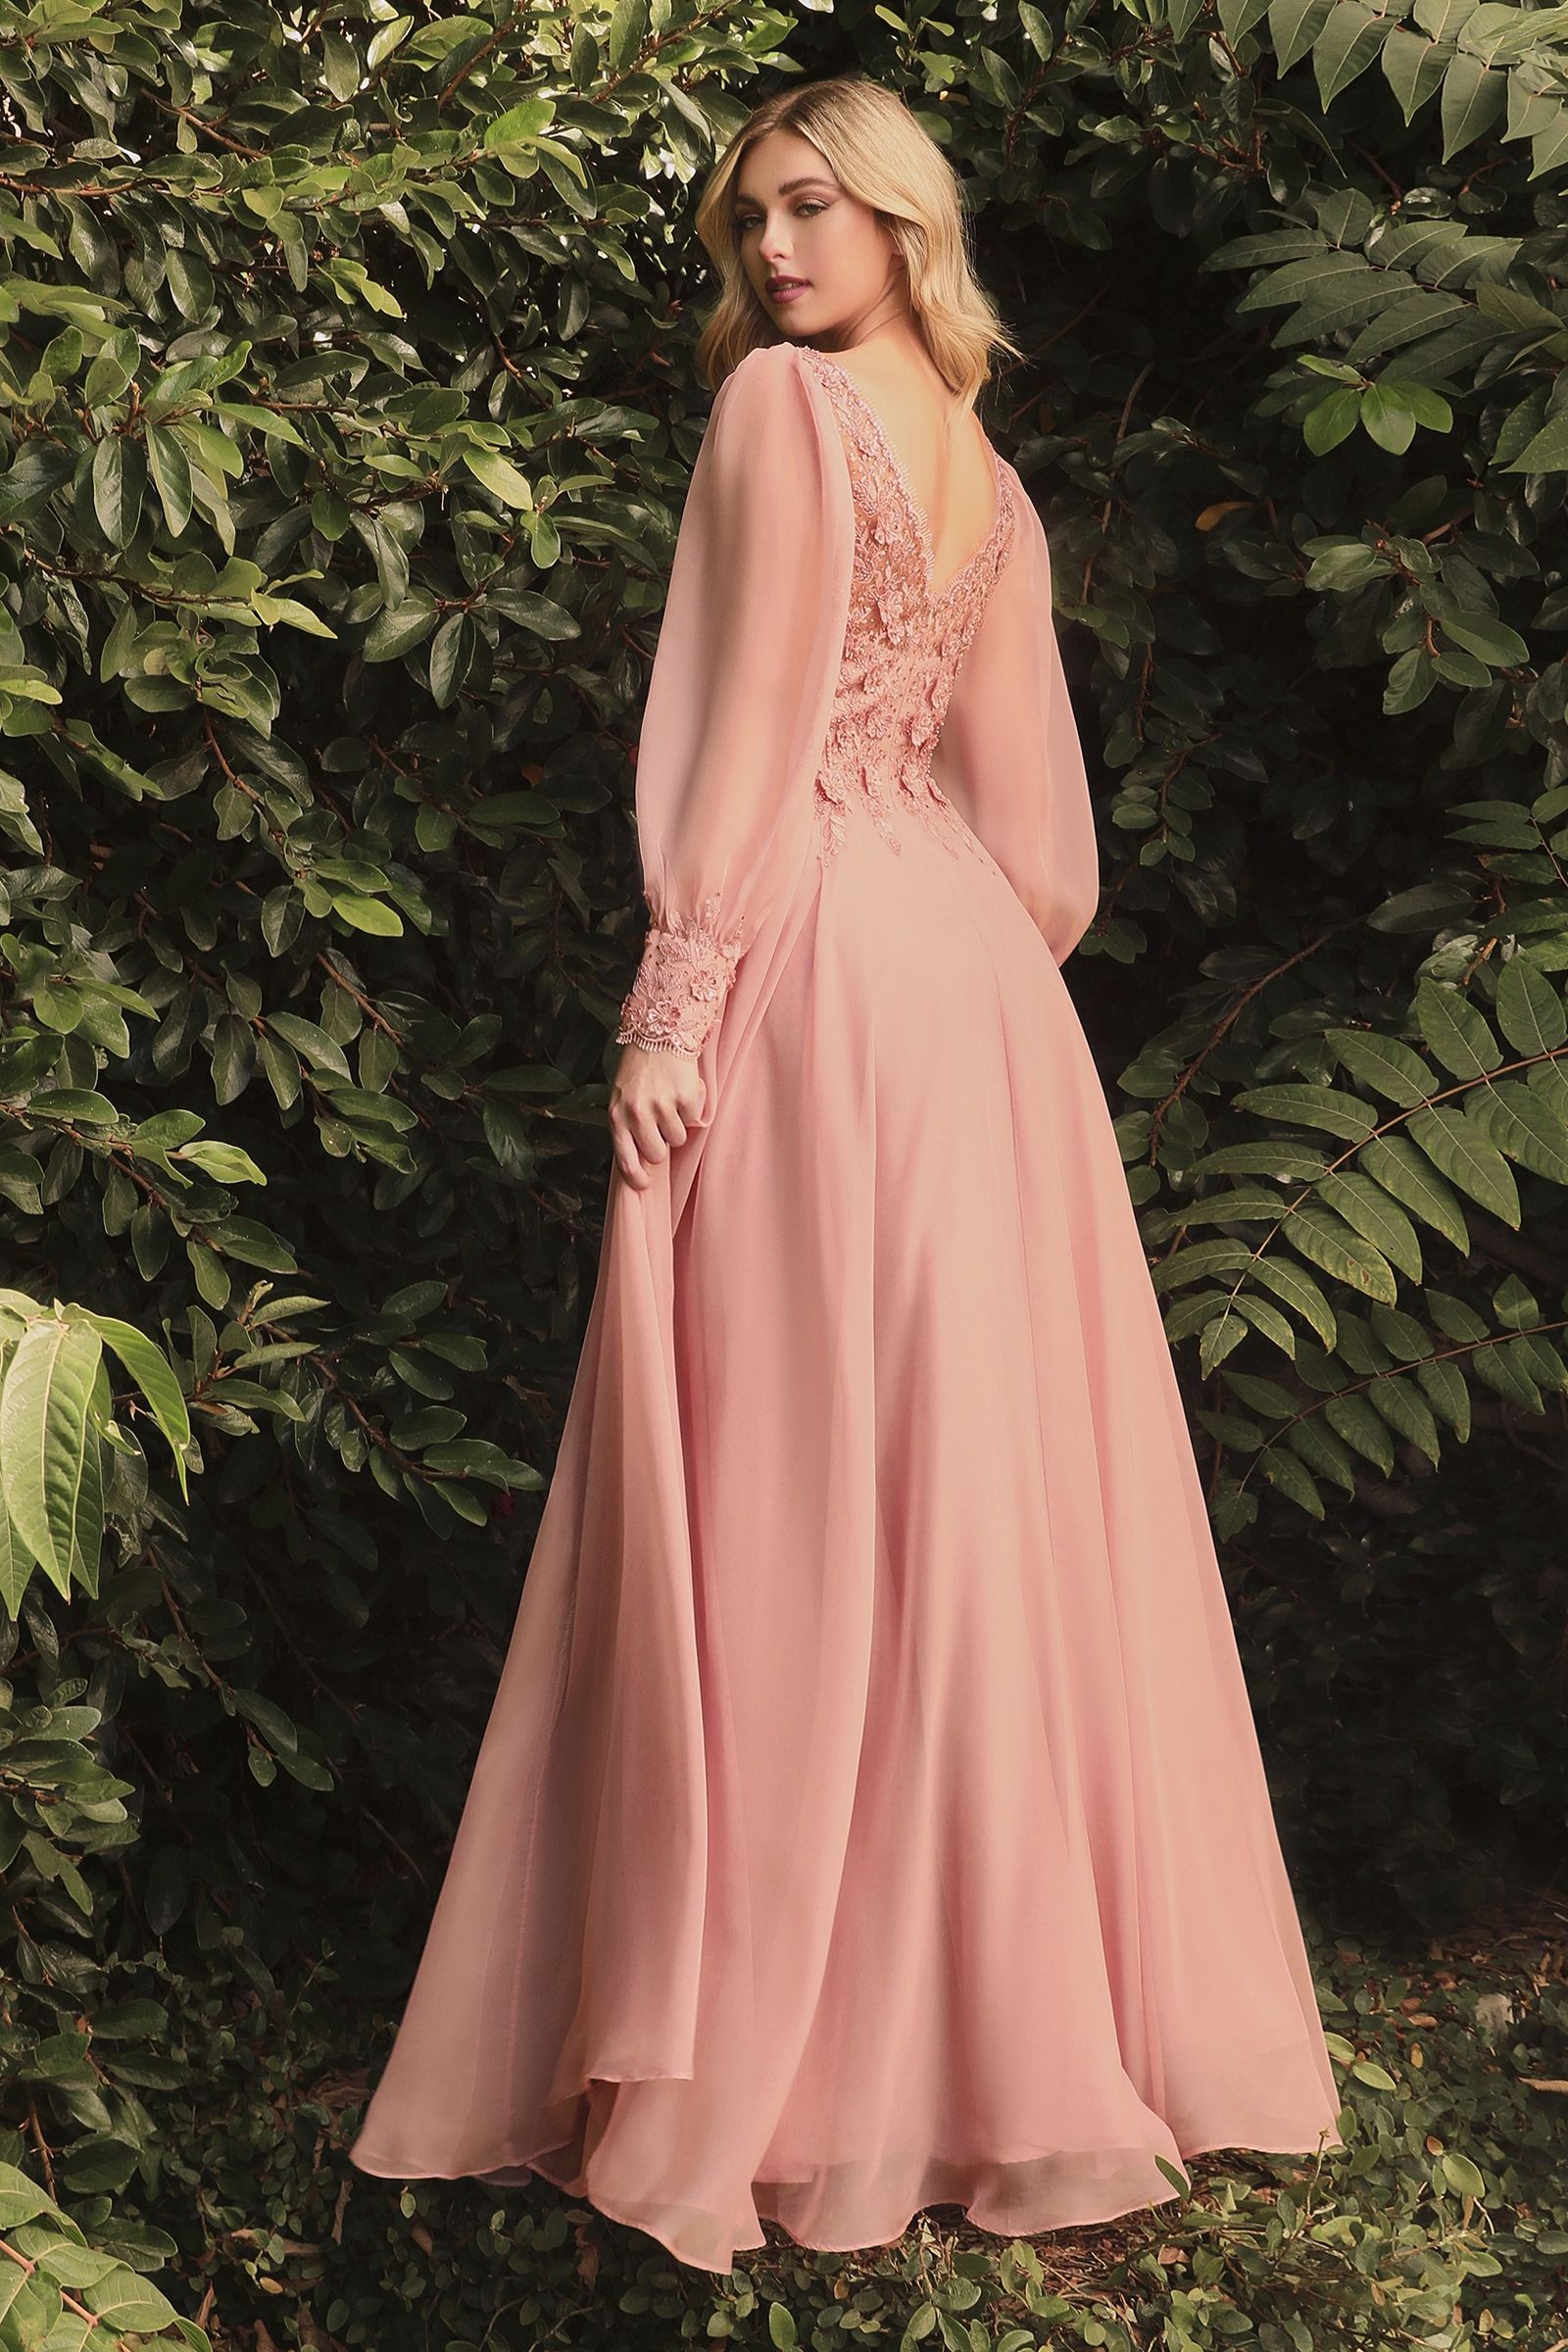 Elegant Long Puff Sleeves A-Line Chiffon Evening & Prom Gown Embellished V-Neck Bodice Sensual Open Back CDCD0183